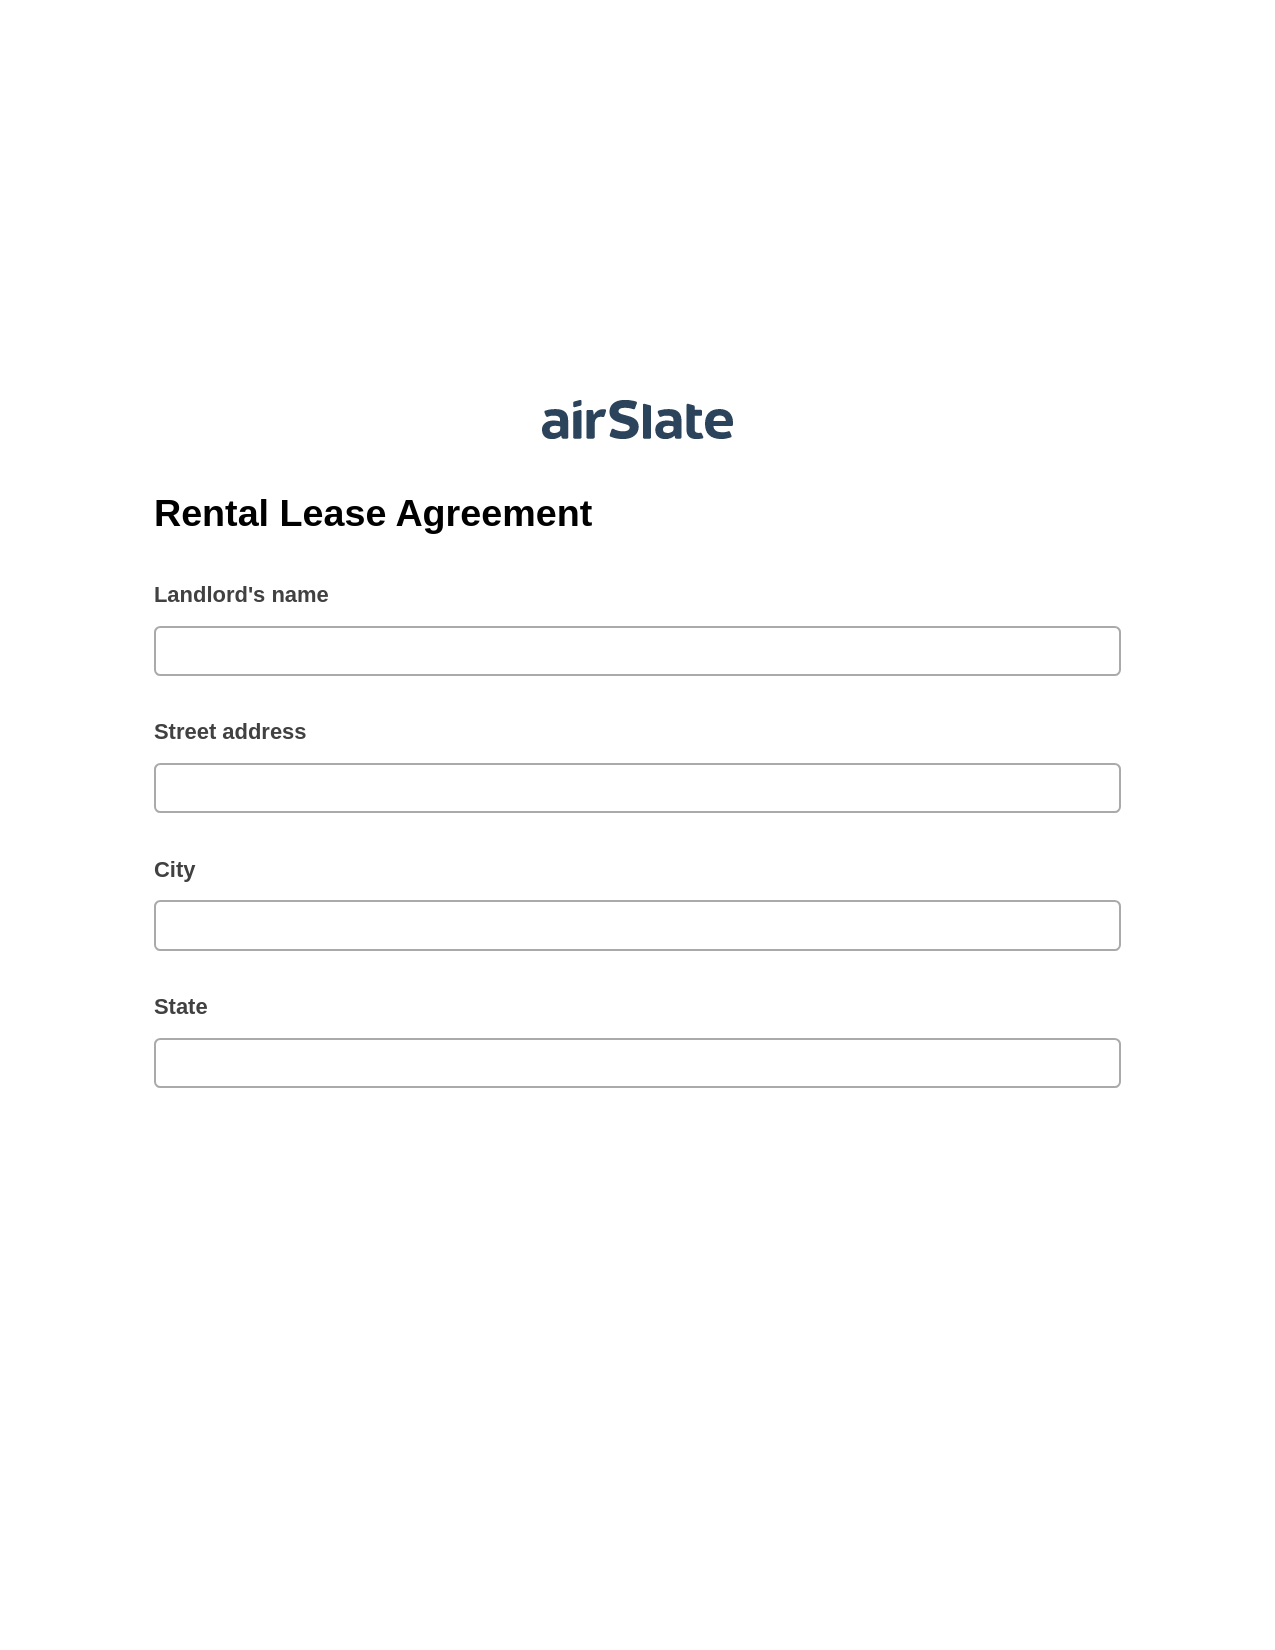 Rental Lease Agreement Pre-fill from Excel Spreadsheet Dropdown Options Bot, Create Slate every Google Sheet Update Bot, Archive to SharePoint Folder Bot